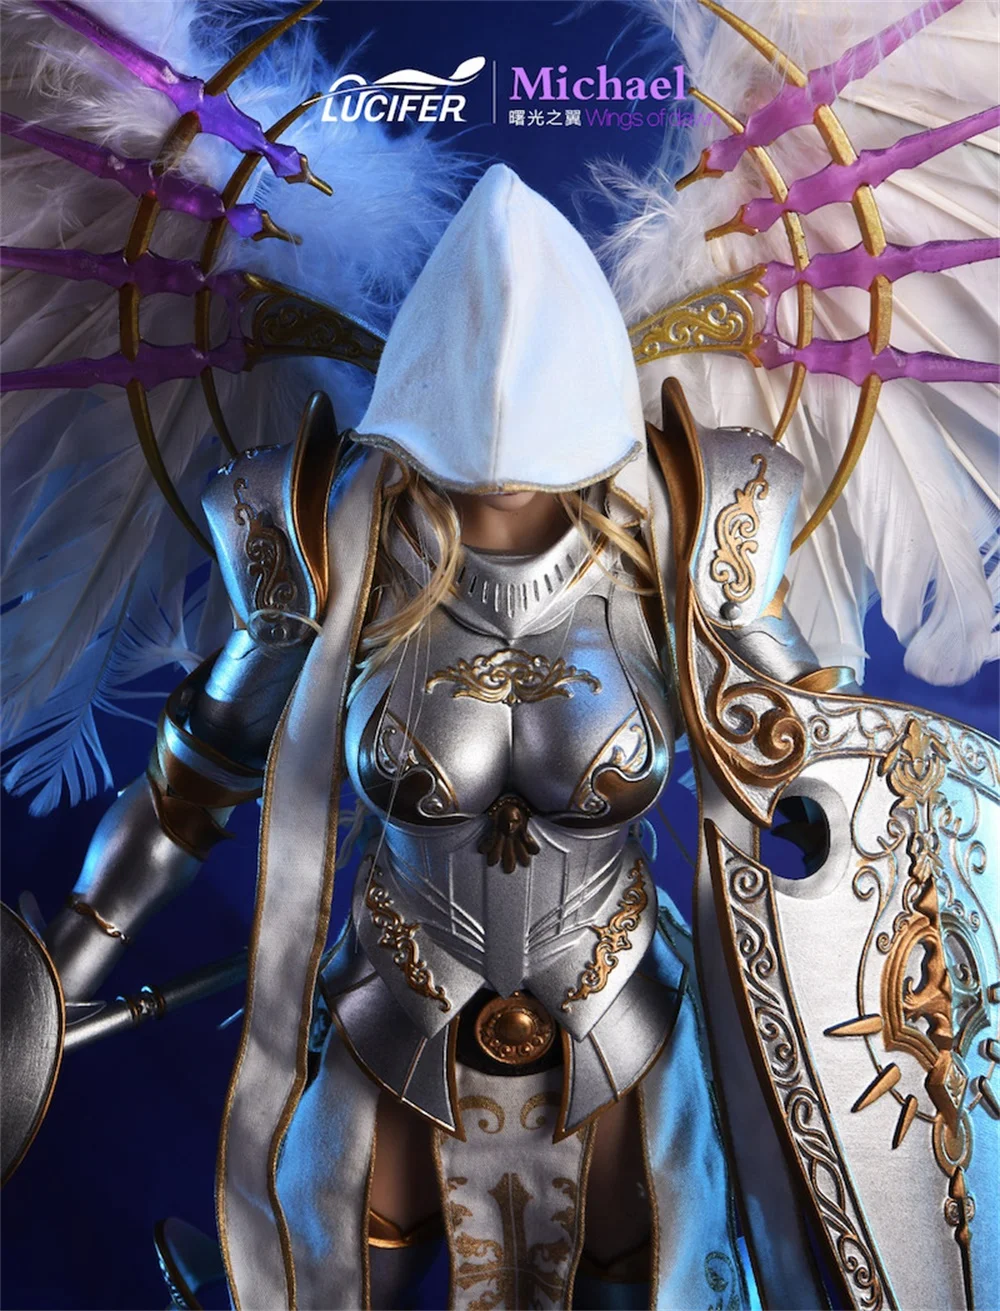 

For Sale 1/6th Lucifer Archangel Michael Wings of Dawn Female Chest Armor Model PVC Material For 12inch Body Doll Collectable